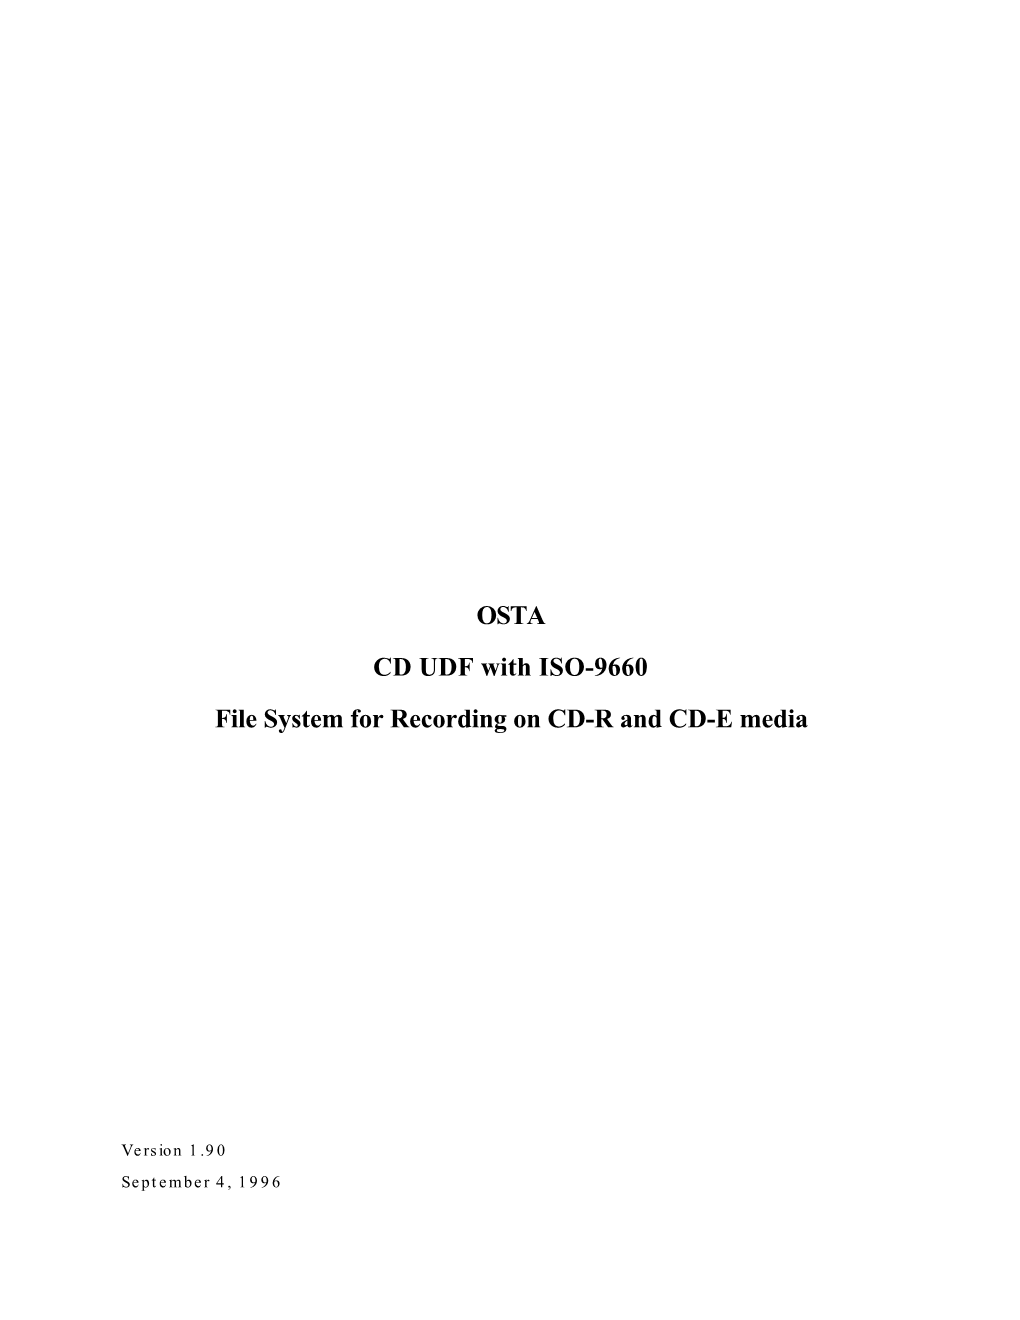 OSTA CD UDF with ISO-9660 File System for Recording on CD-R and CD-E Media